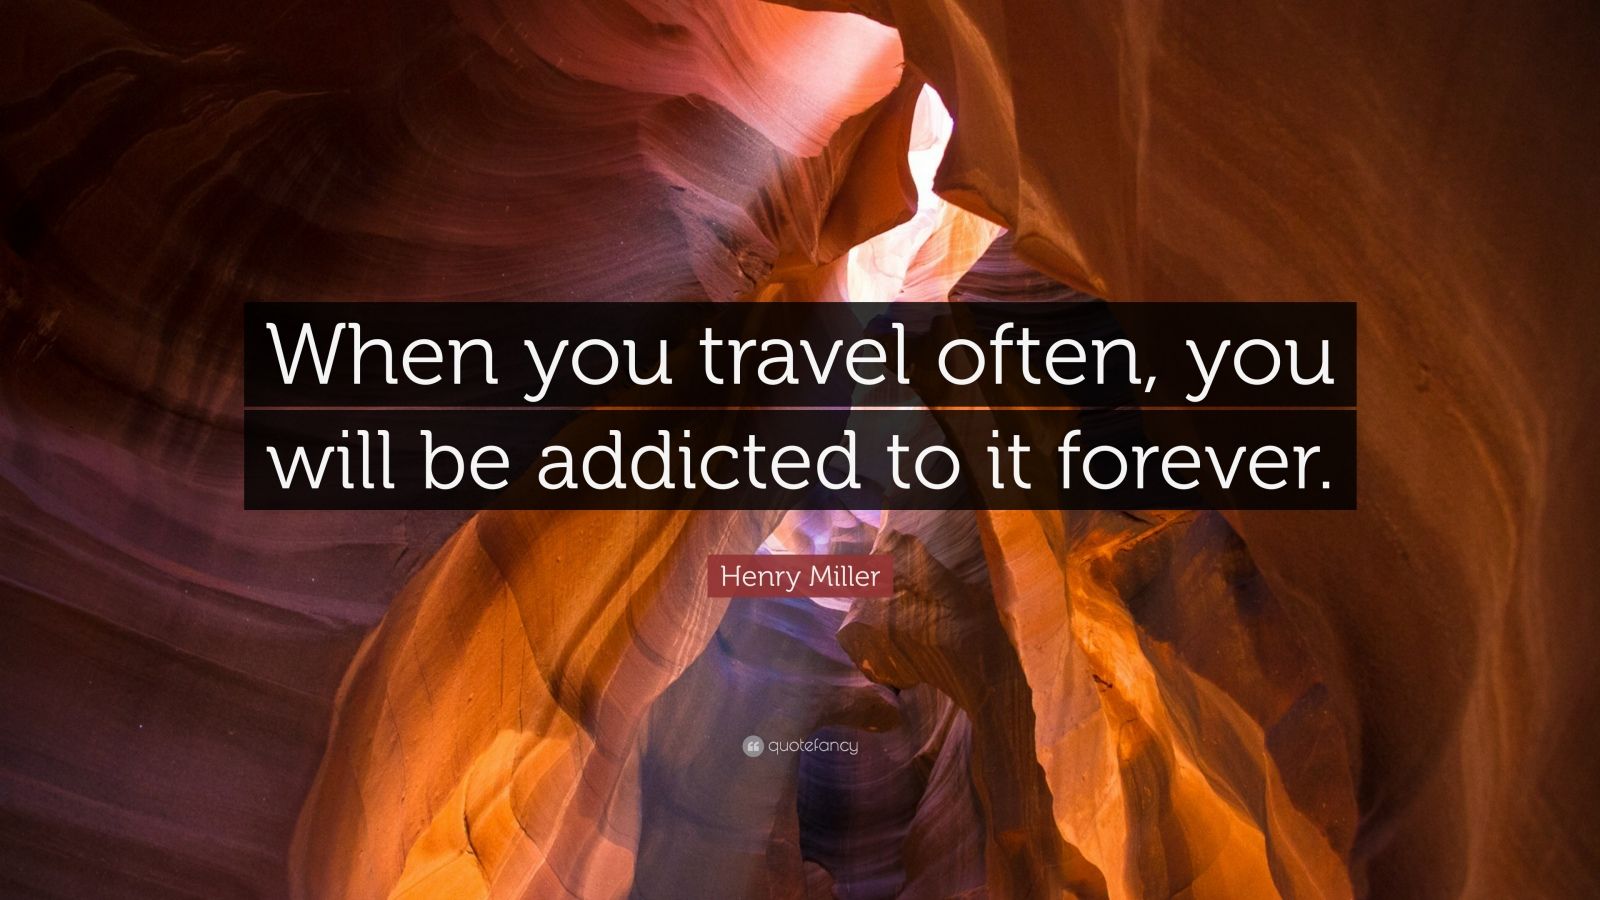 Henry Miller Quote “when You Travel Often You Will Be Addicted To It